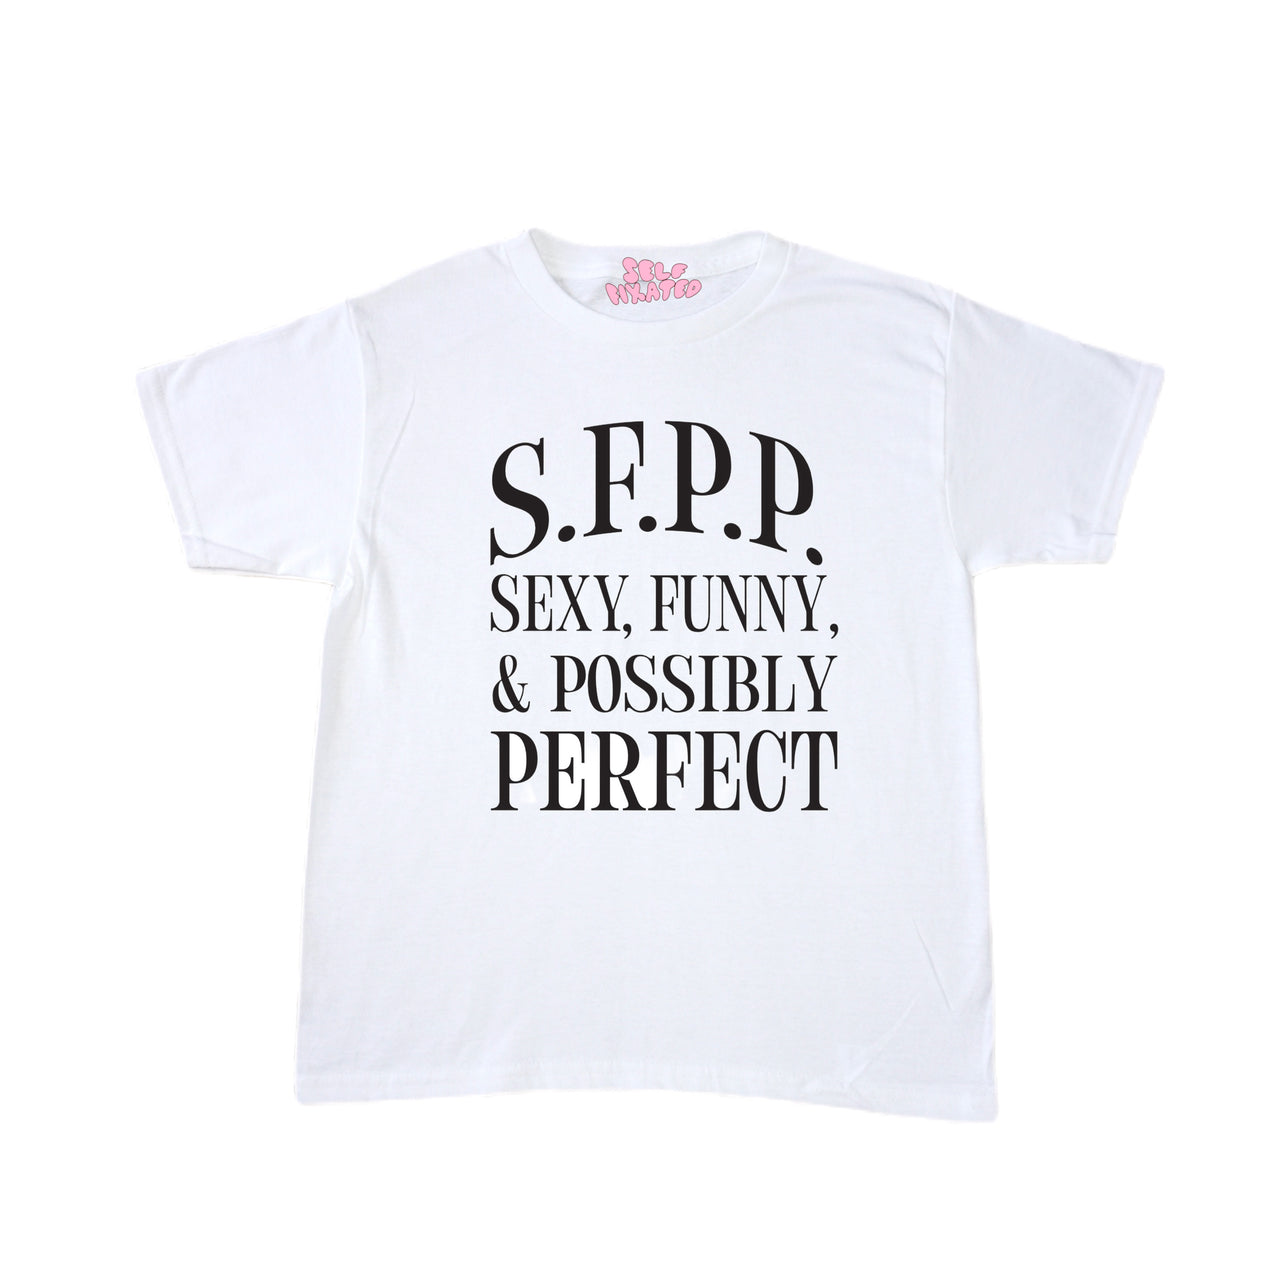 sexy, funny, & possibly perfect tee